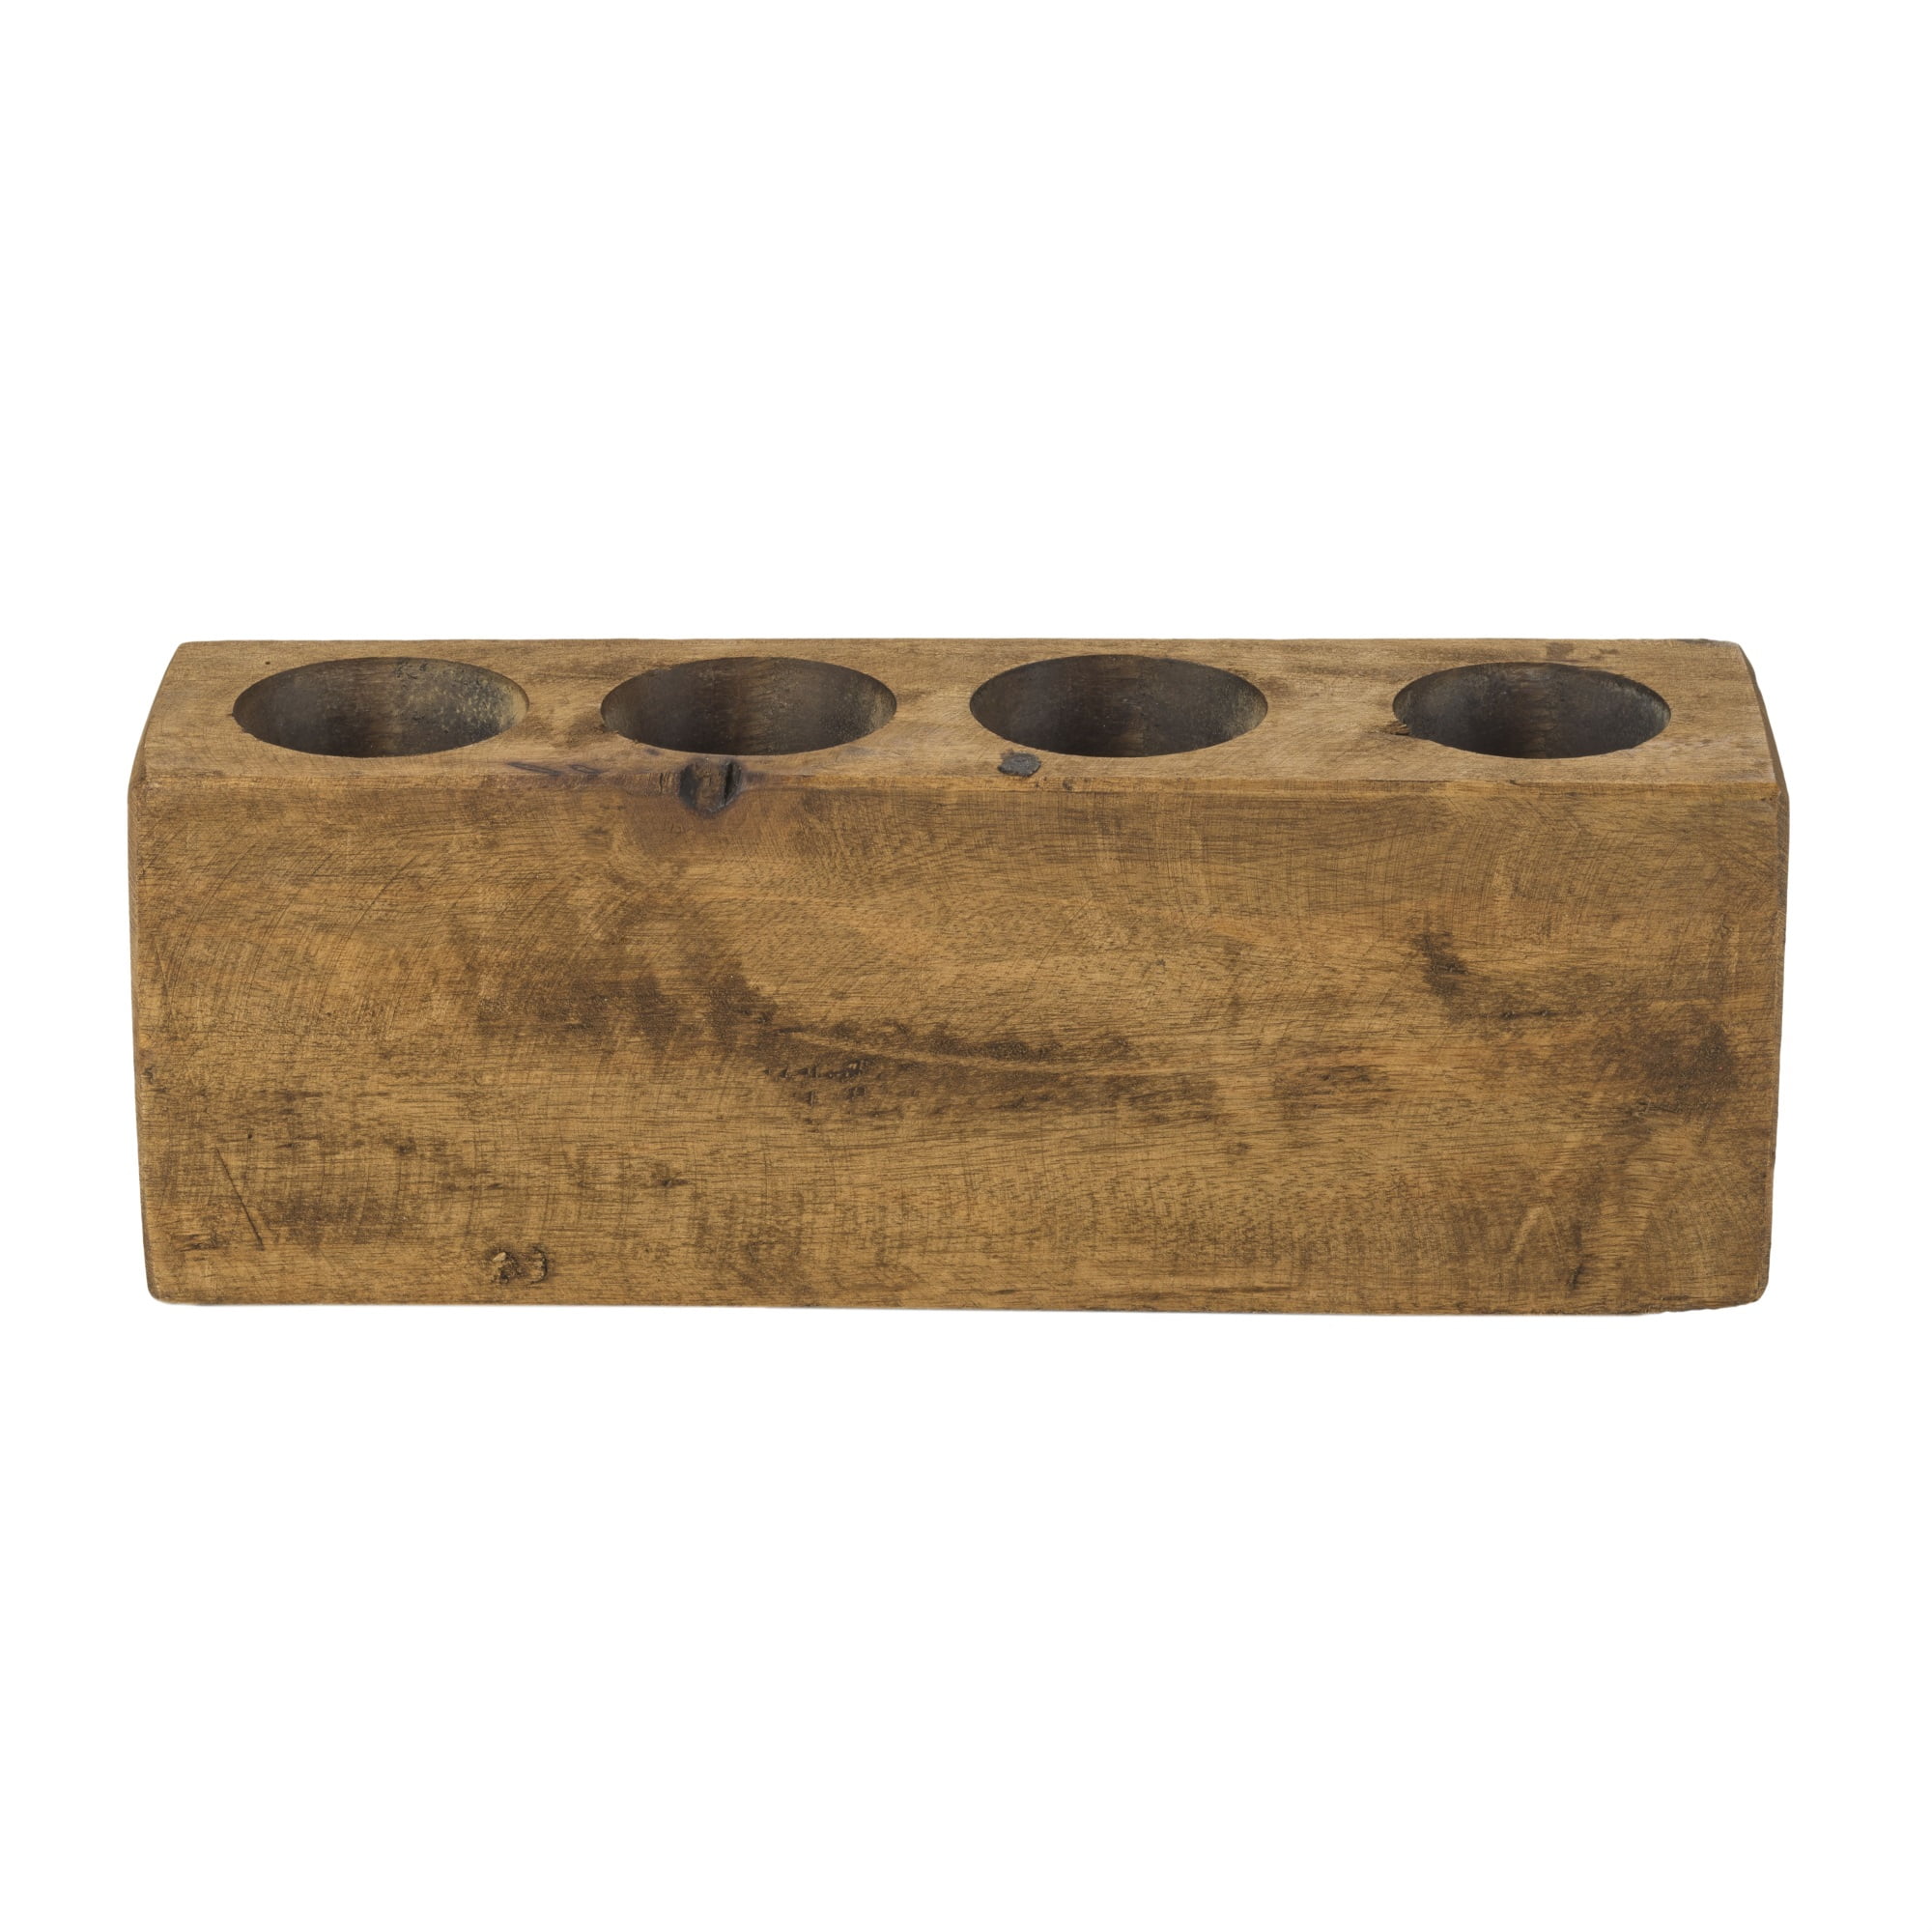 2 Hole Wooden Sugar Mold Candle or Plant Holder Wood grain may vary. 